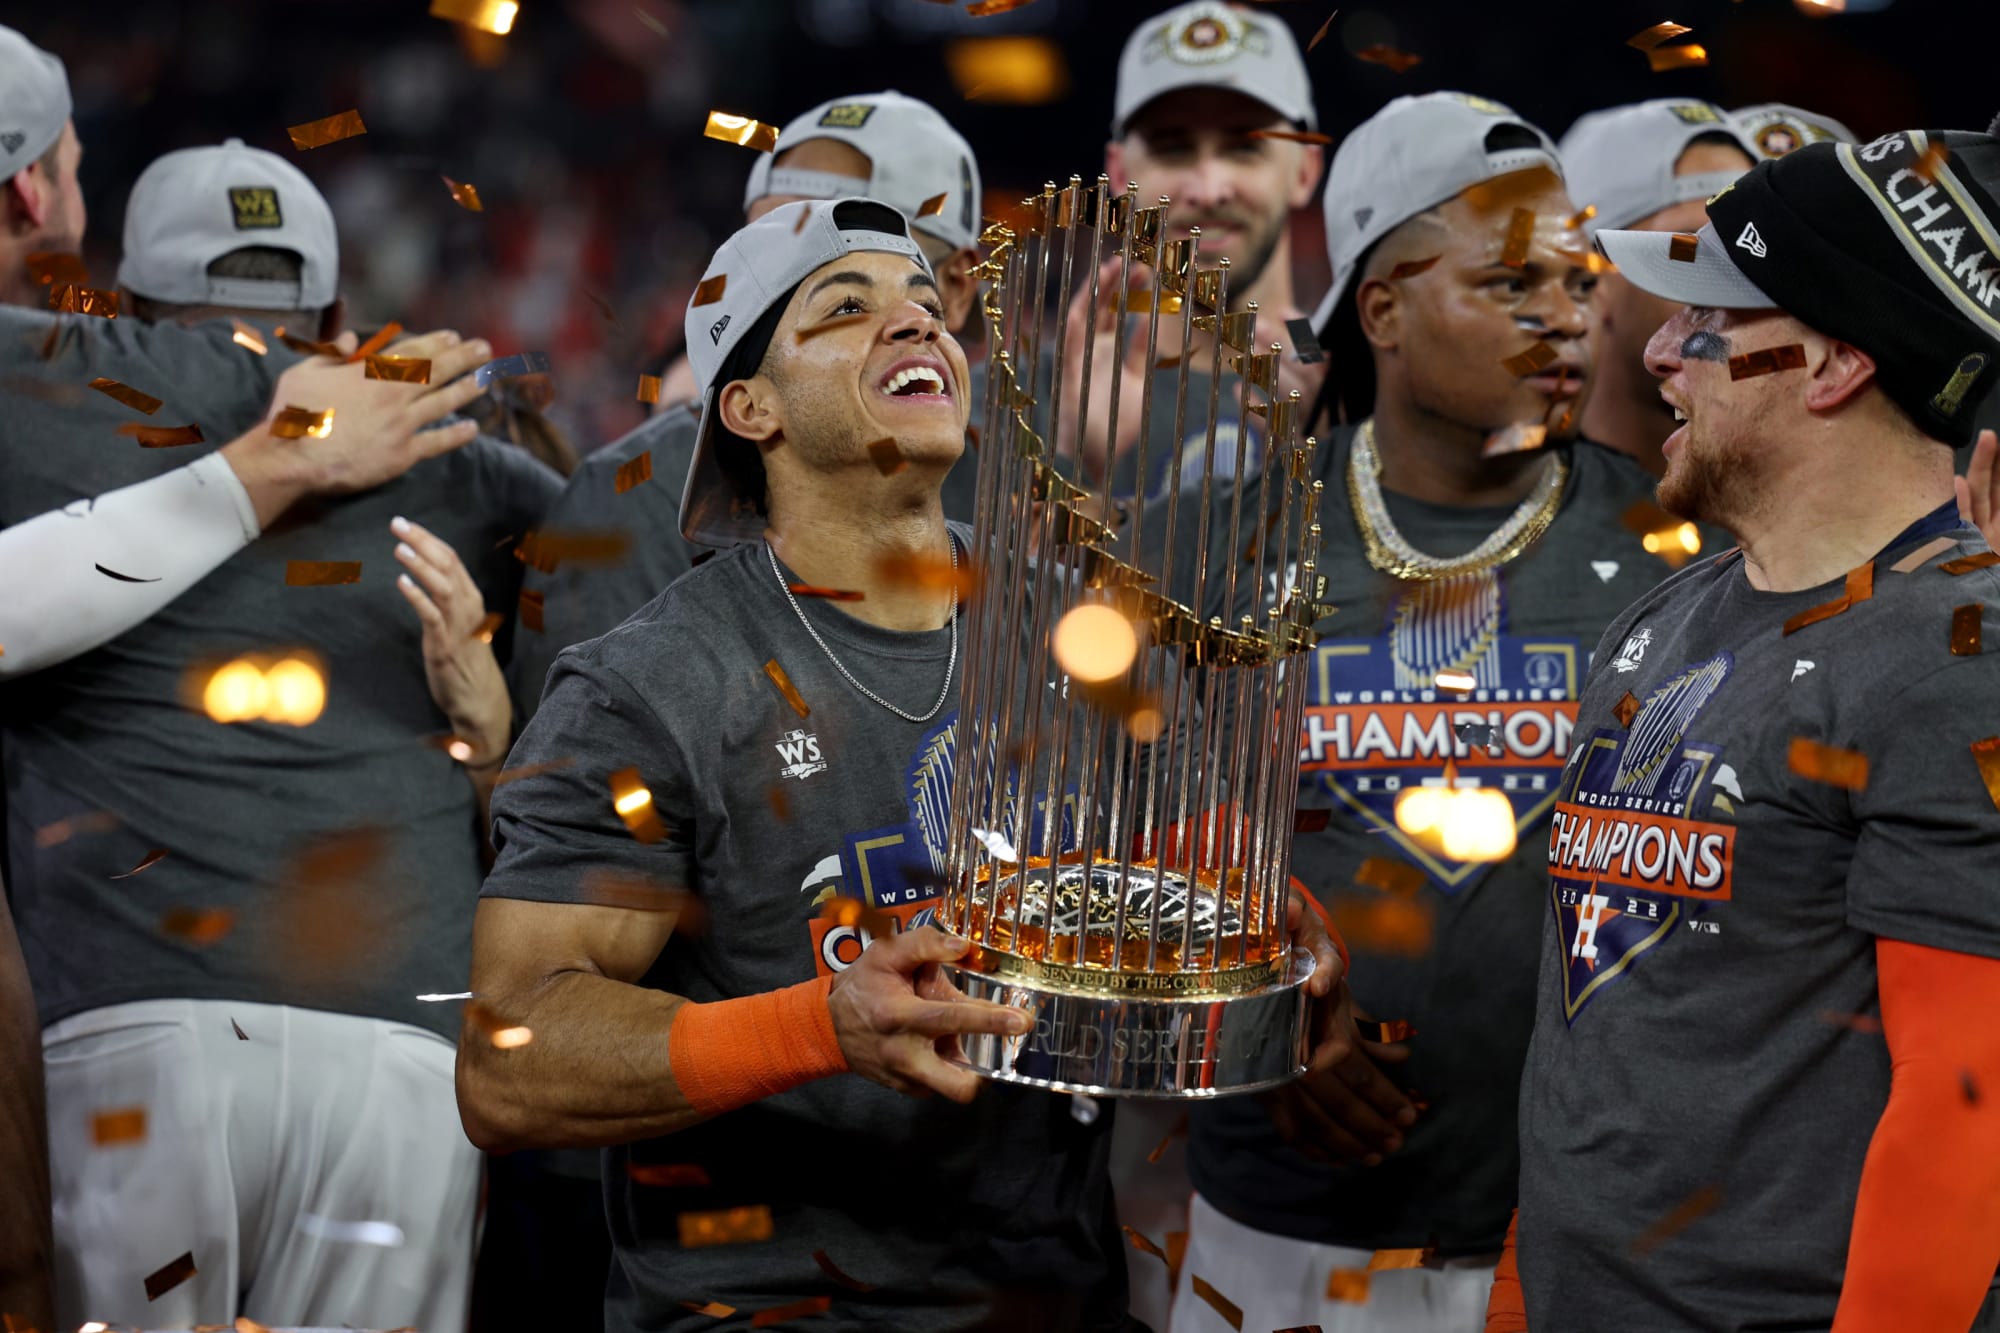 MLB predictions: Way-too-early World Series previous winners